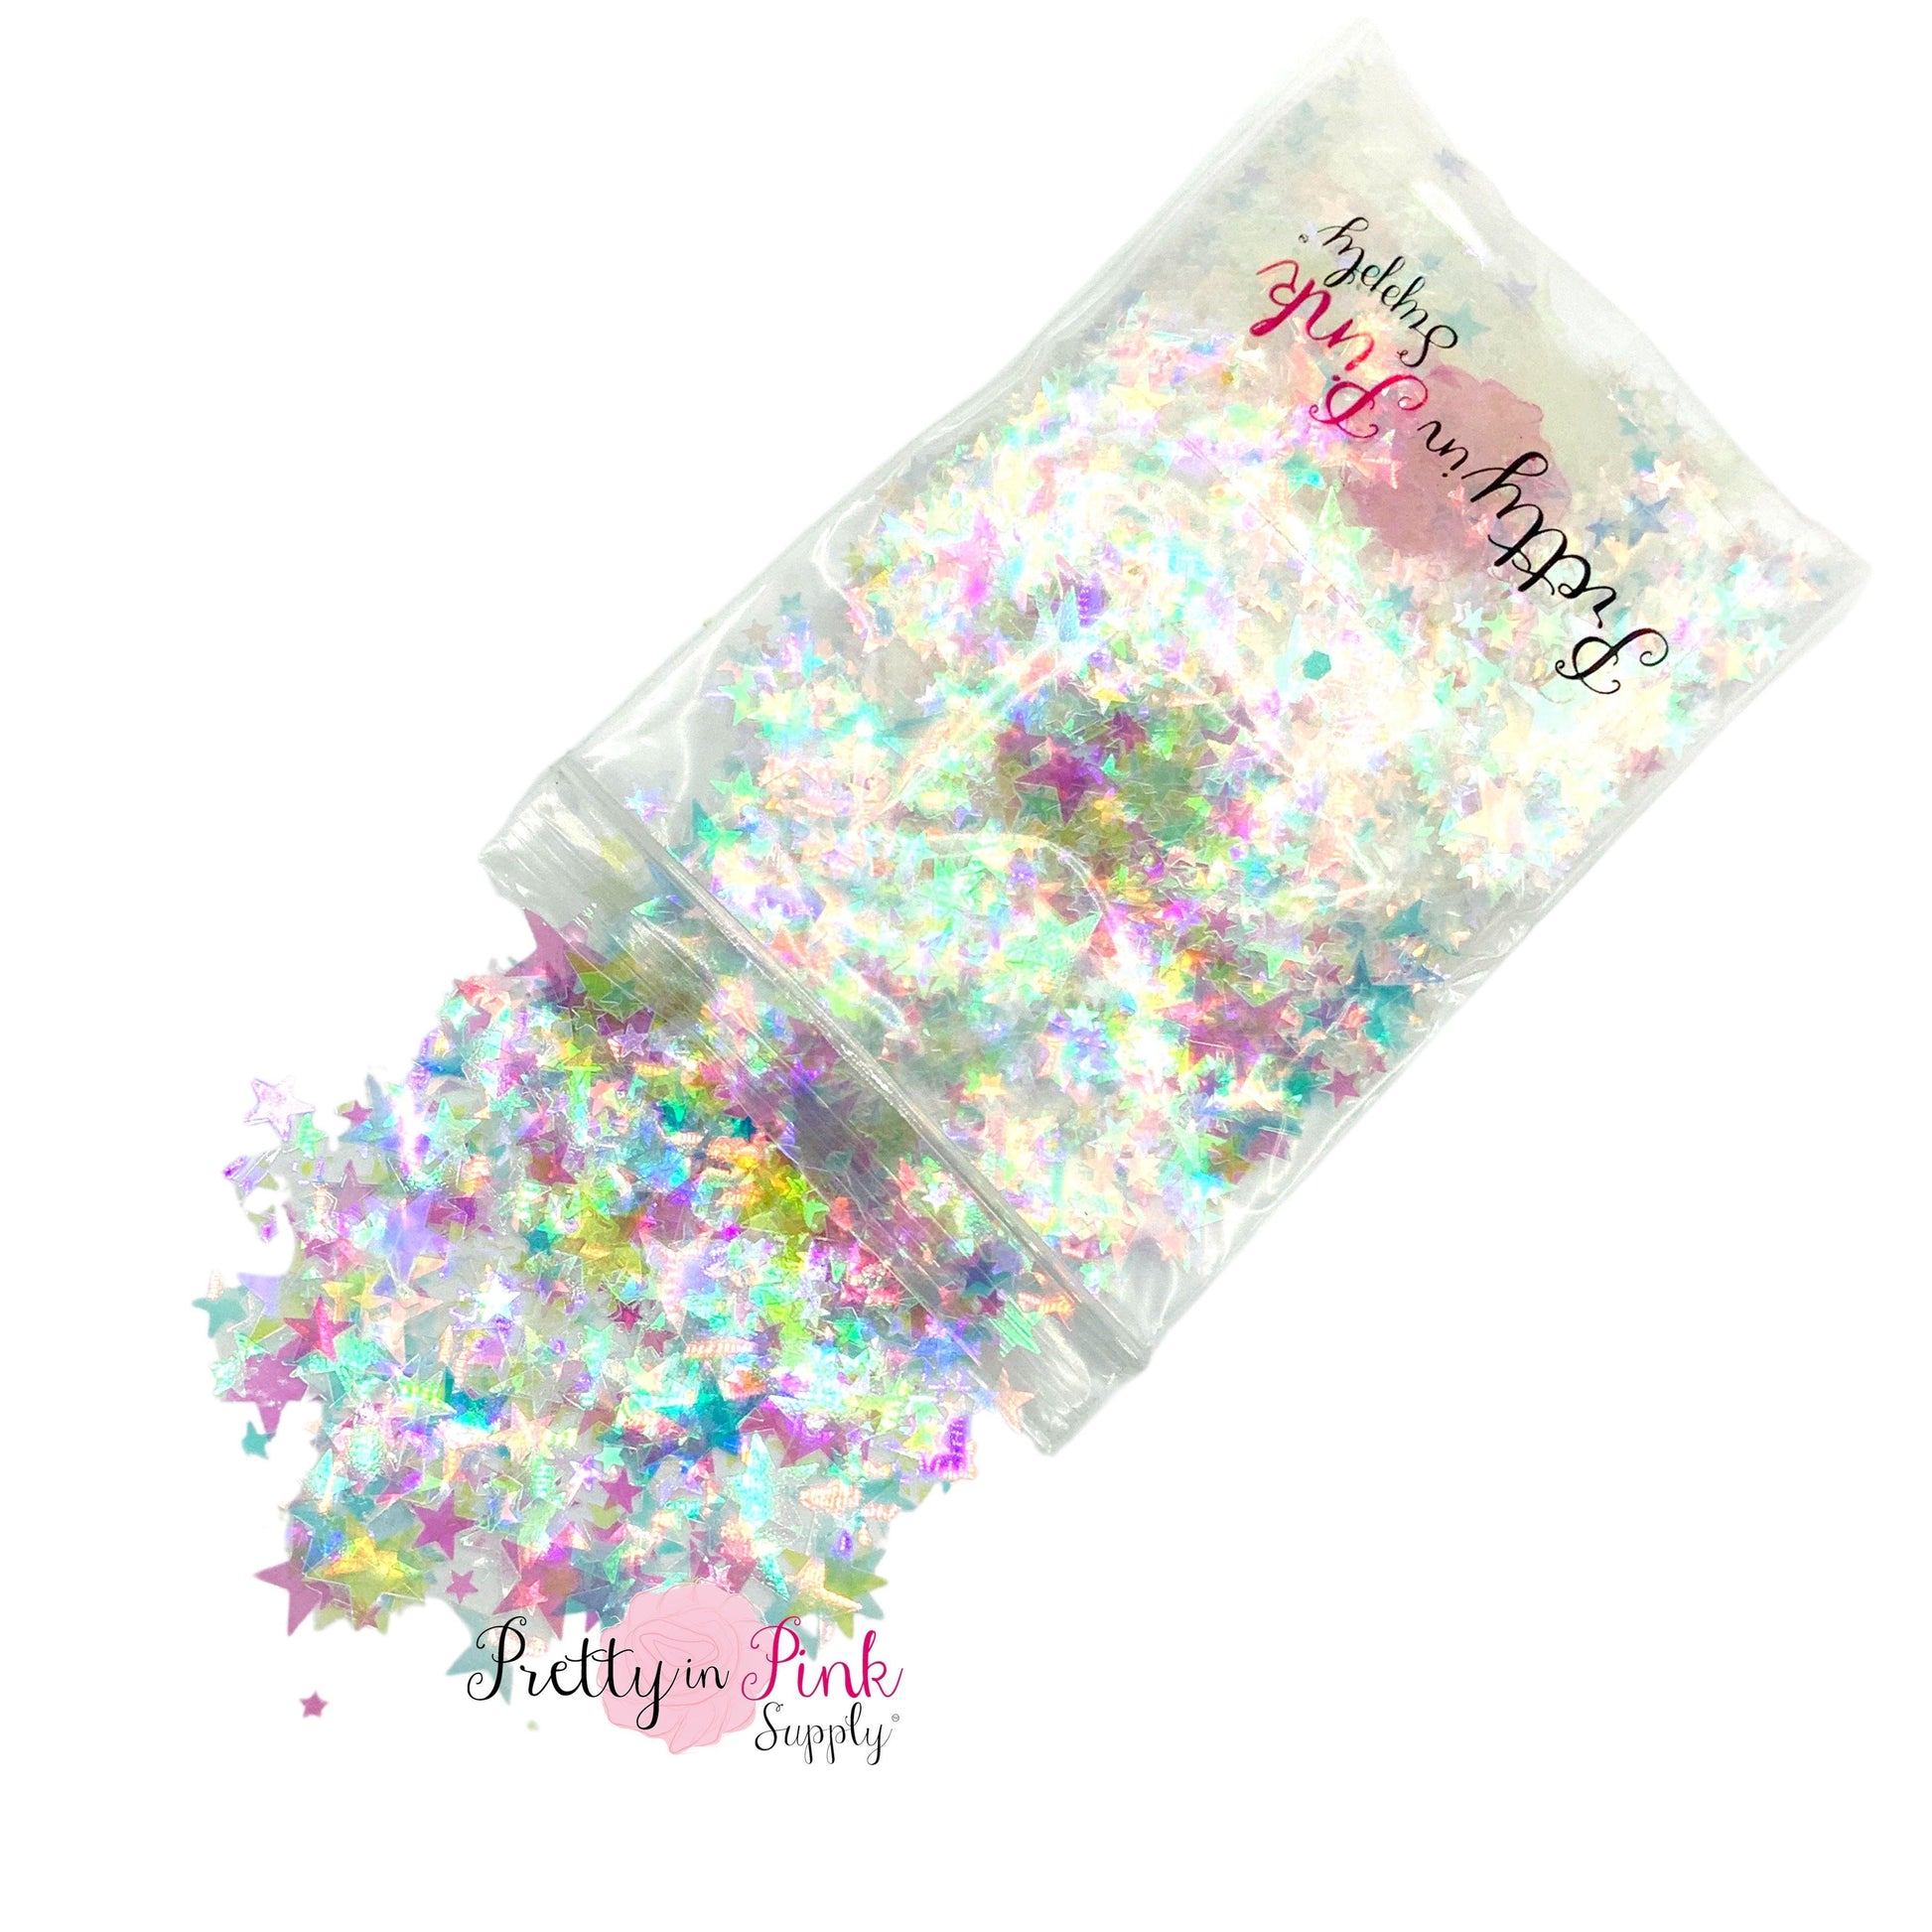 Spilling bag of clear holographic star glitter.